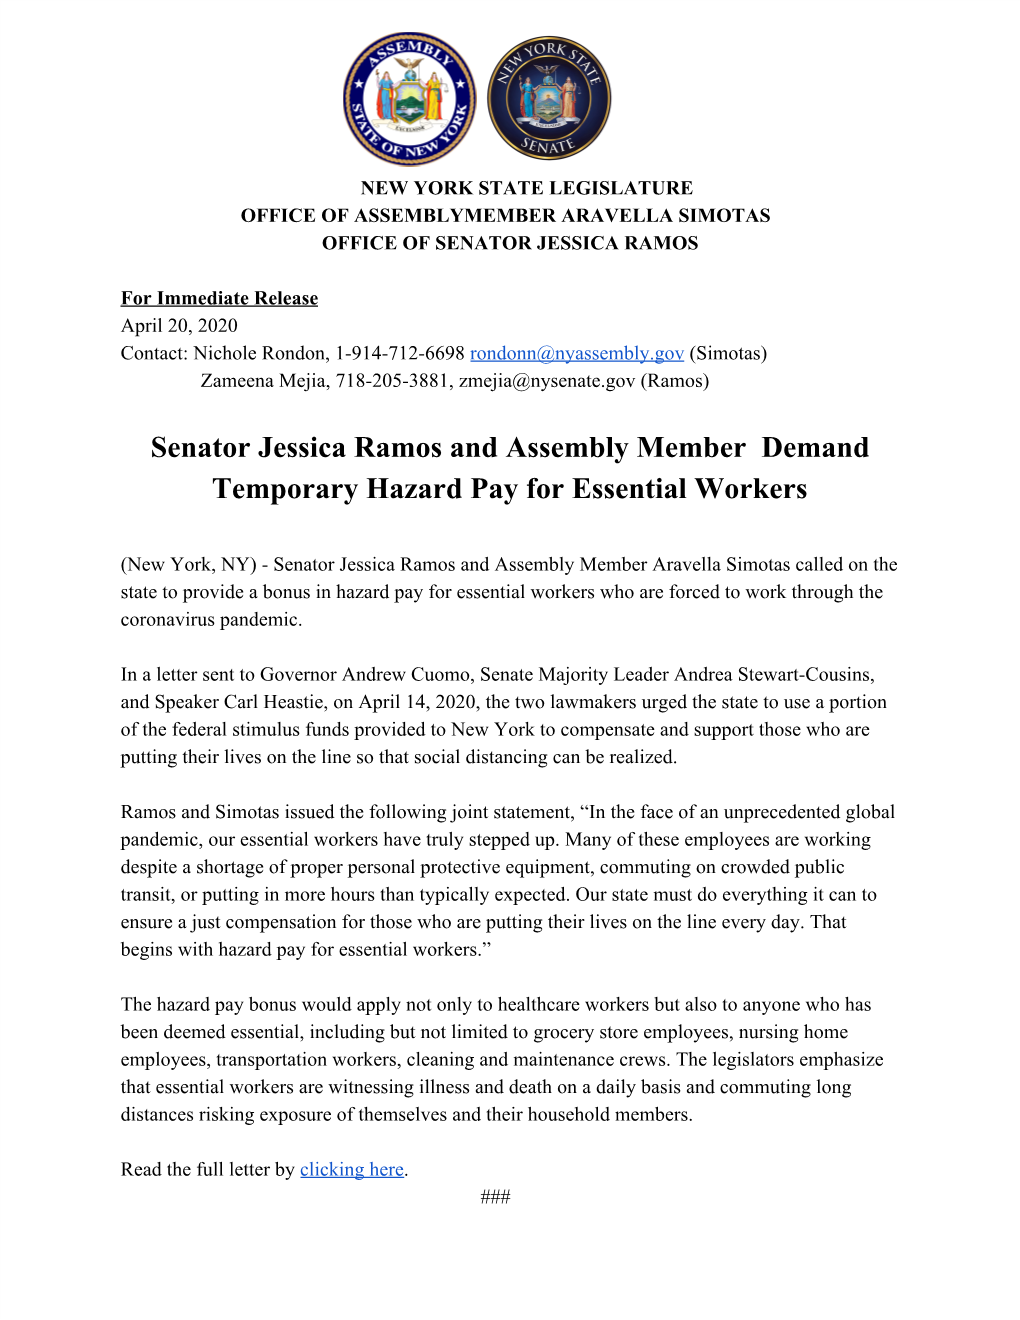 Senator Jessica Ramos and Assembly Member Demand Temporary Hazard Pay for Essential Workers